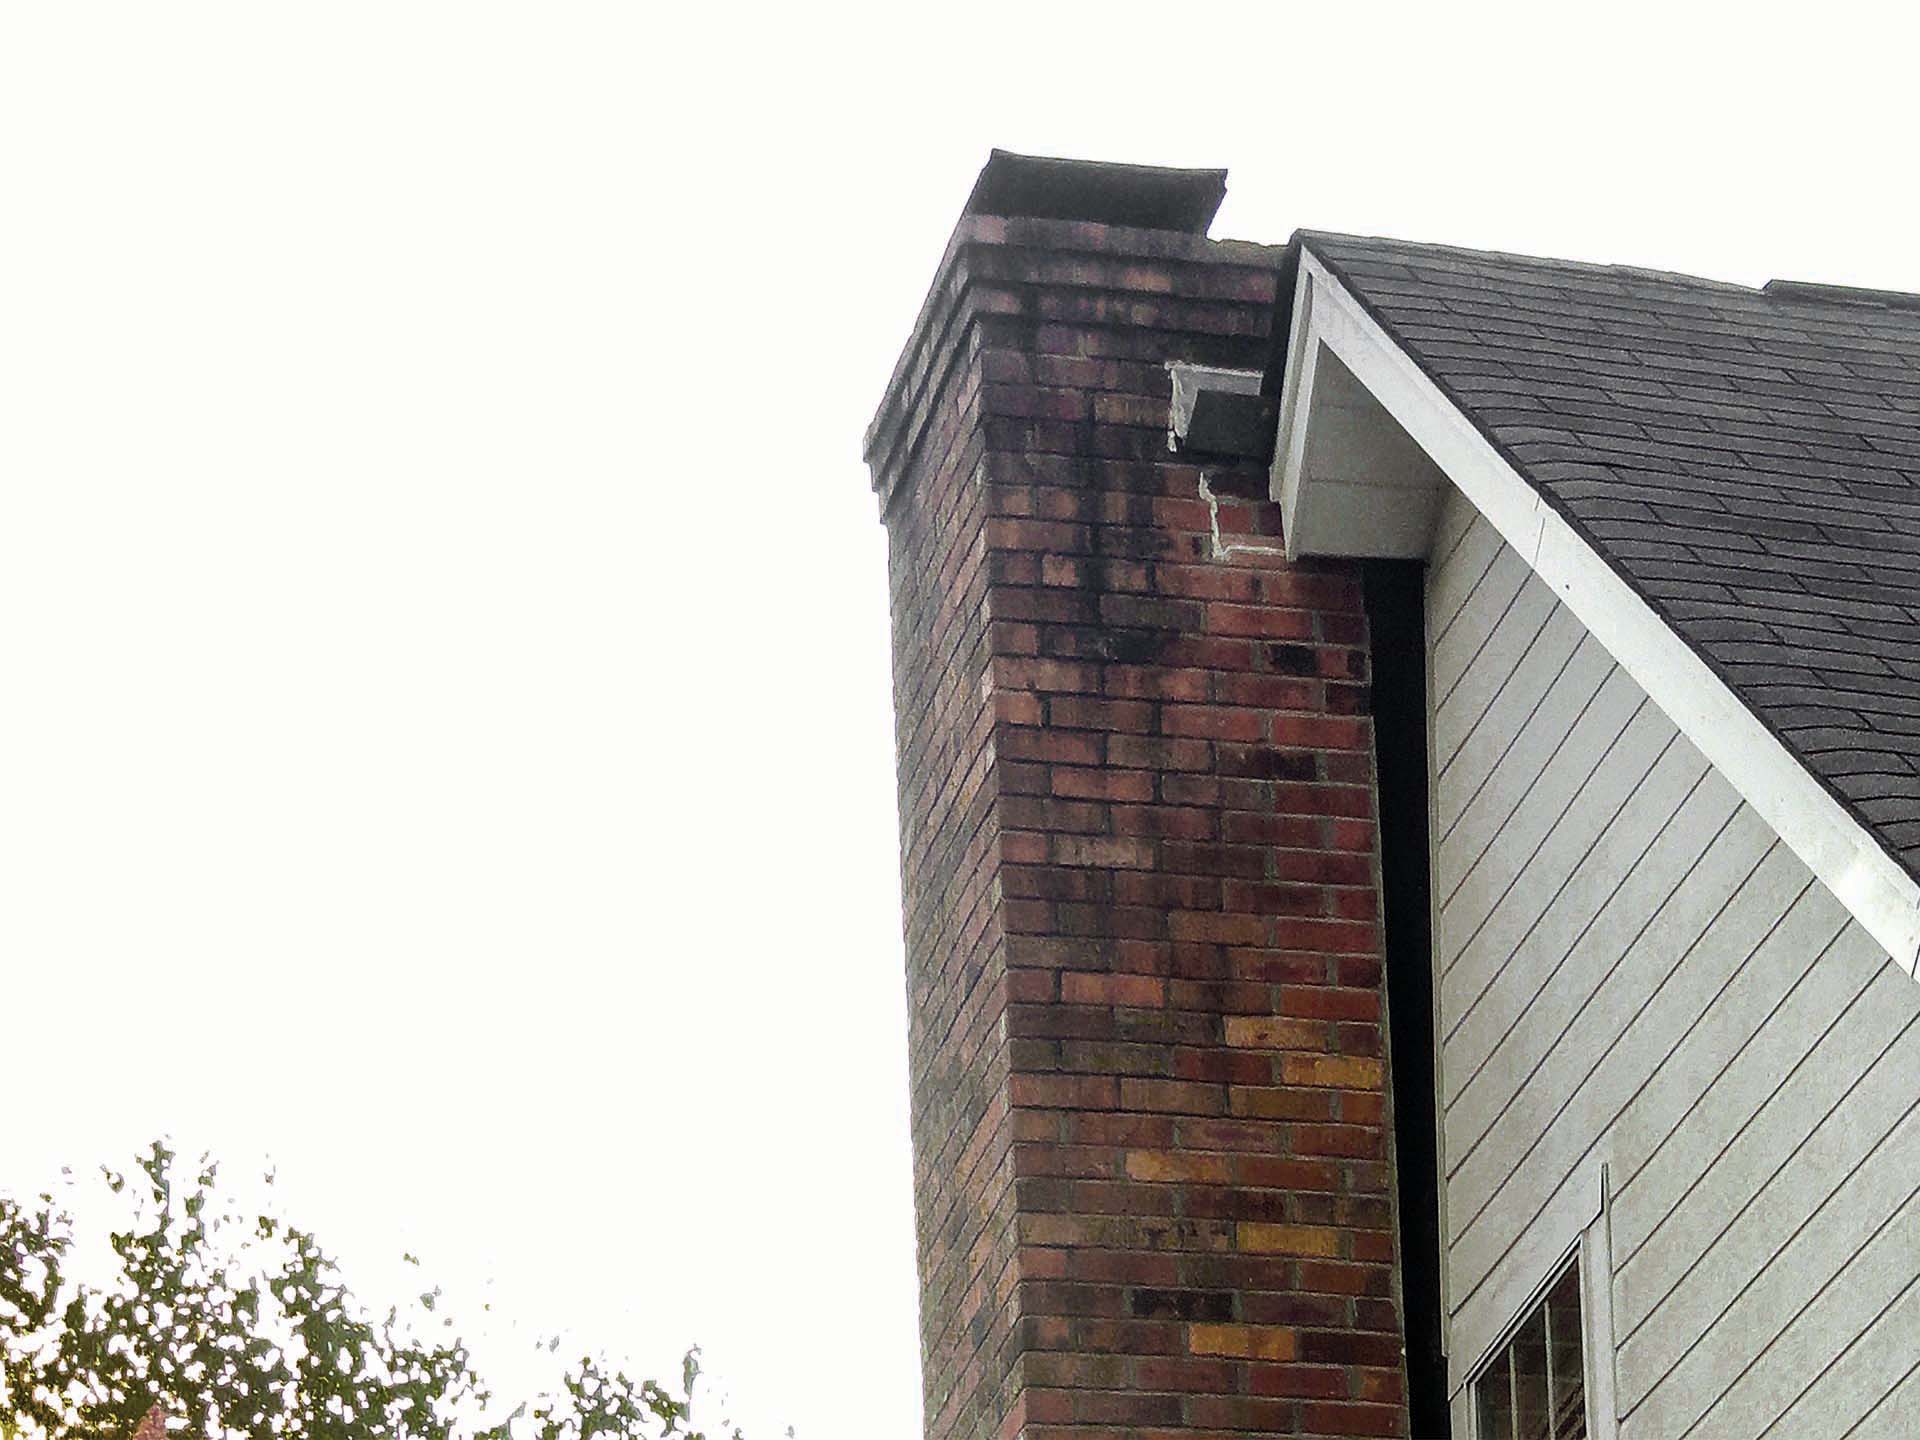 chimney tilting away from home